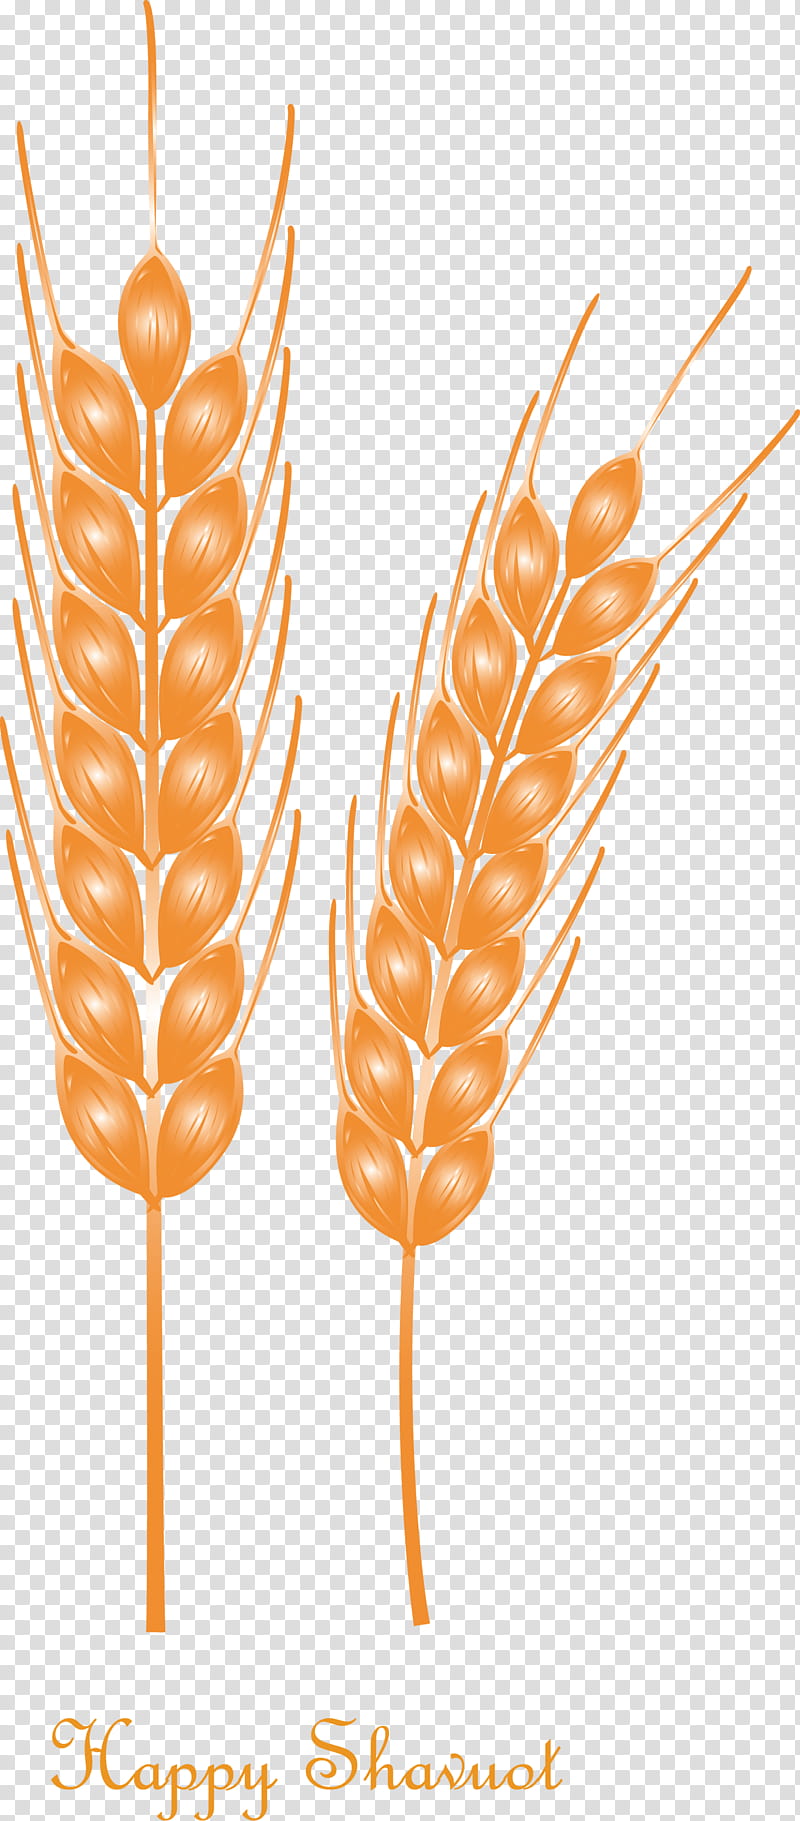 Happy Shavuot Shavuot Shovuos, Stick Candy, Food Grain, Grass Family, Wheat, Plant transparent background PNG clipart